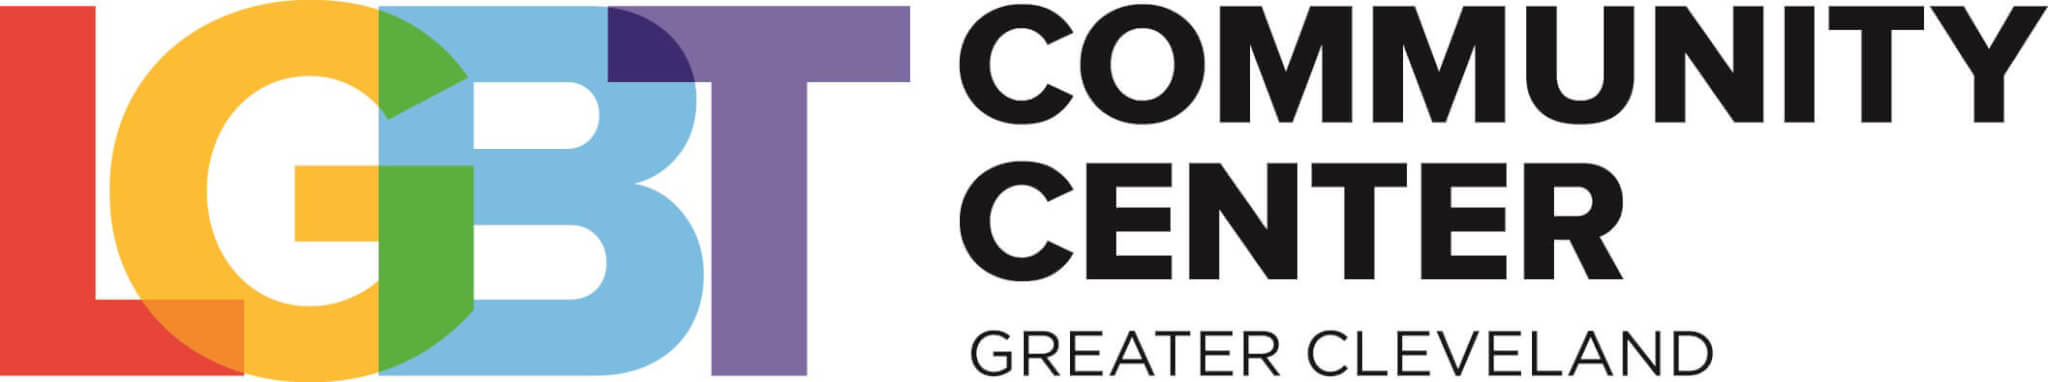 Logo image for the Lesbian Gay Bisexual Transgender Community Center of Greater Cleveland